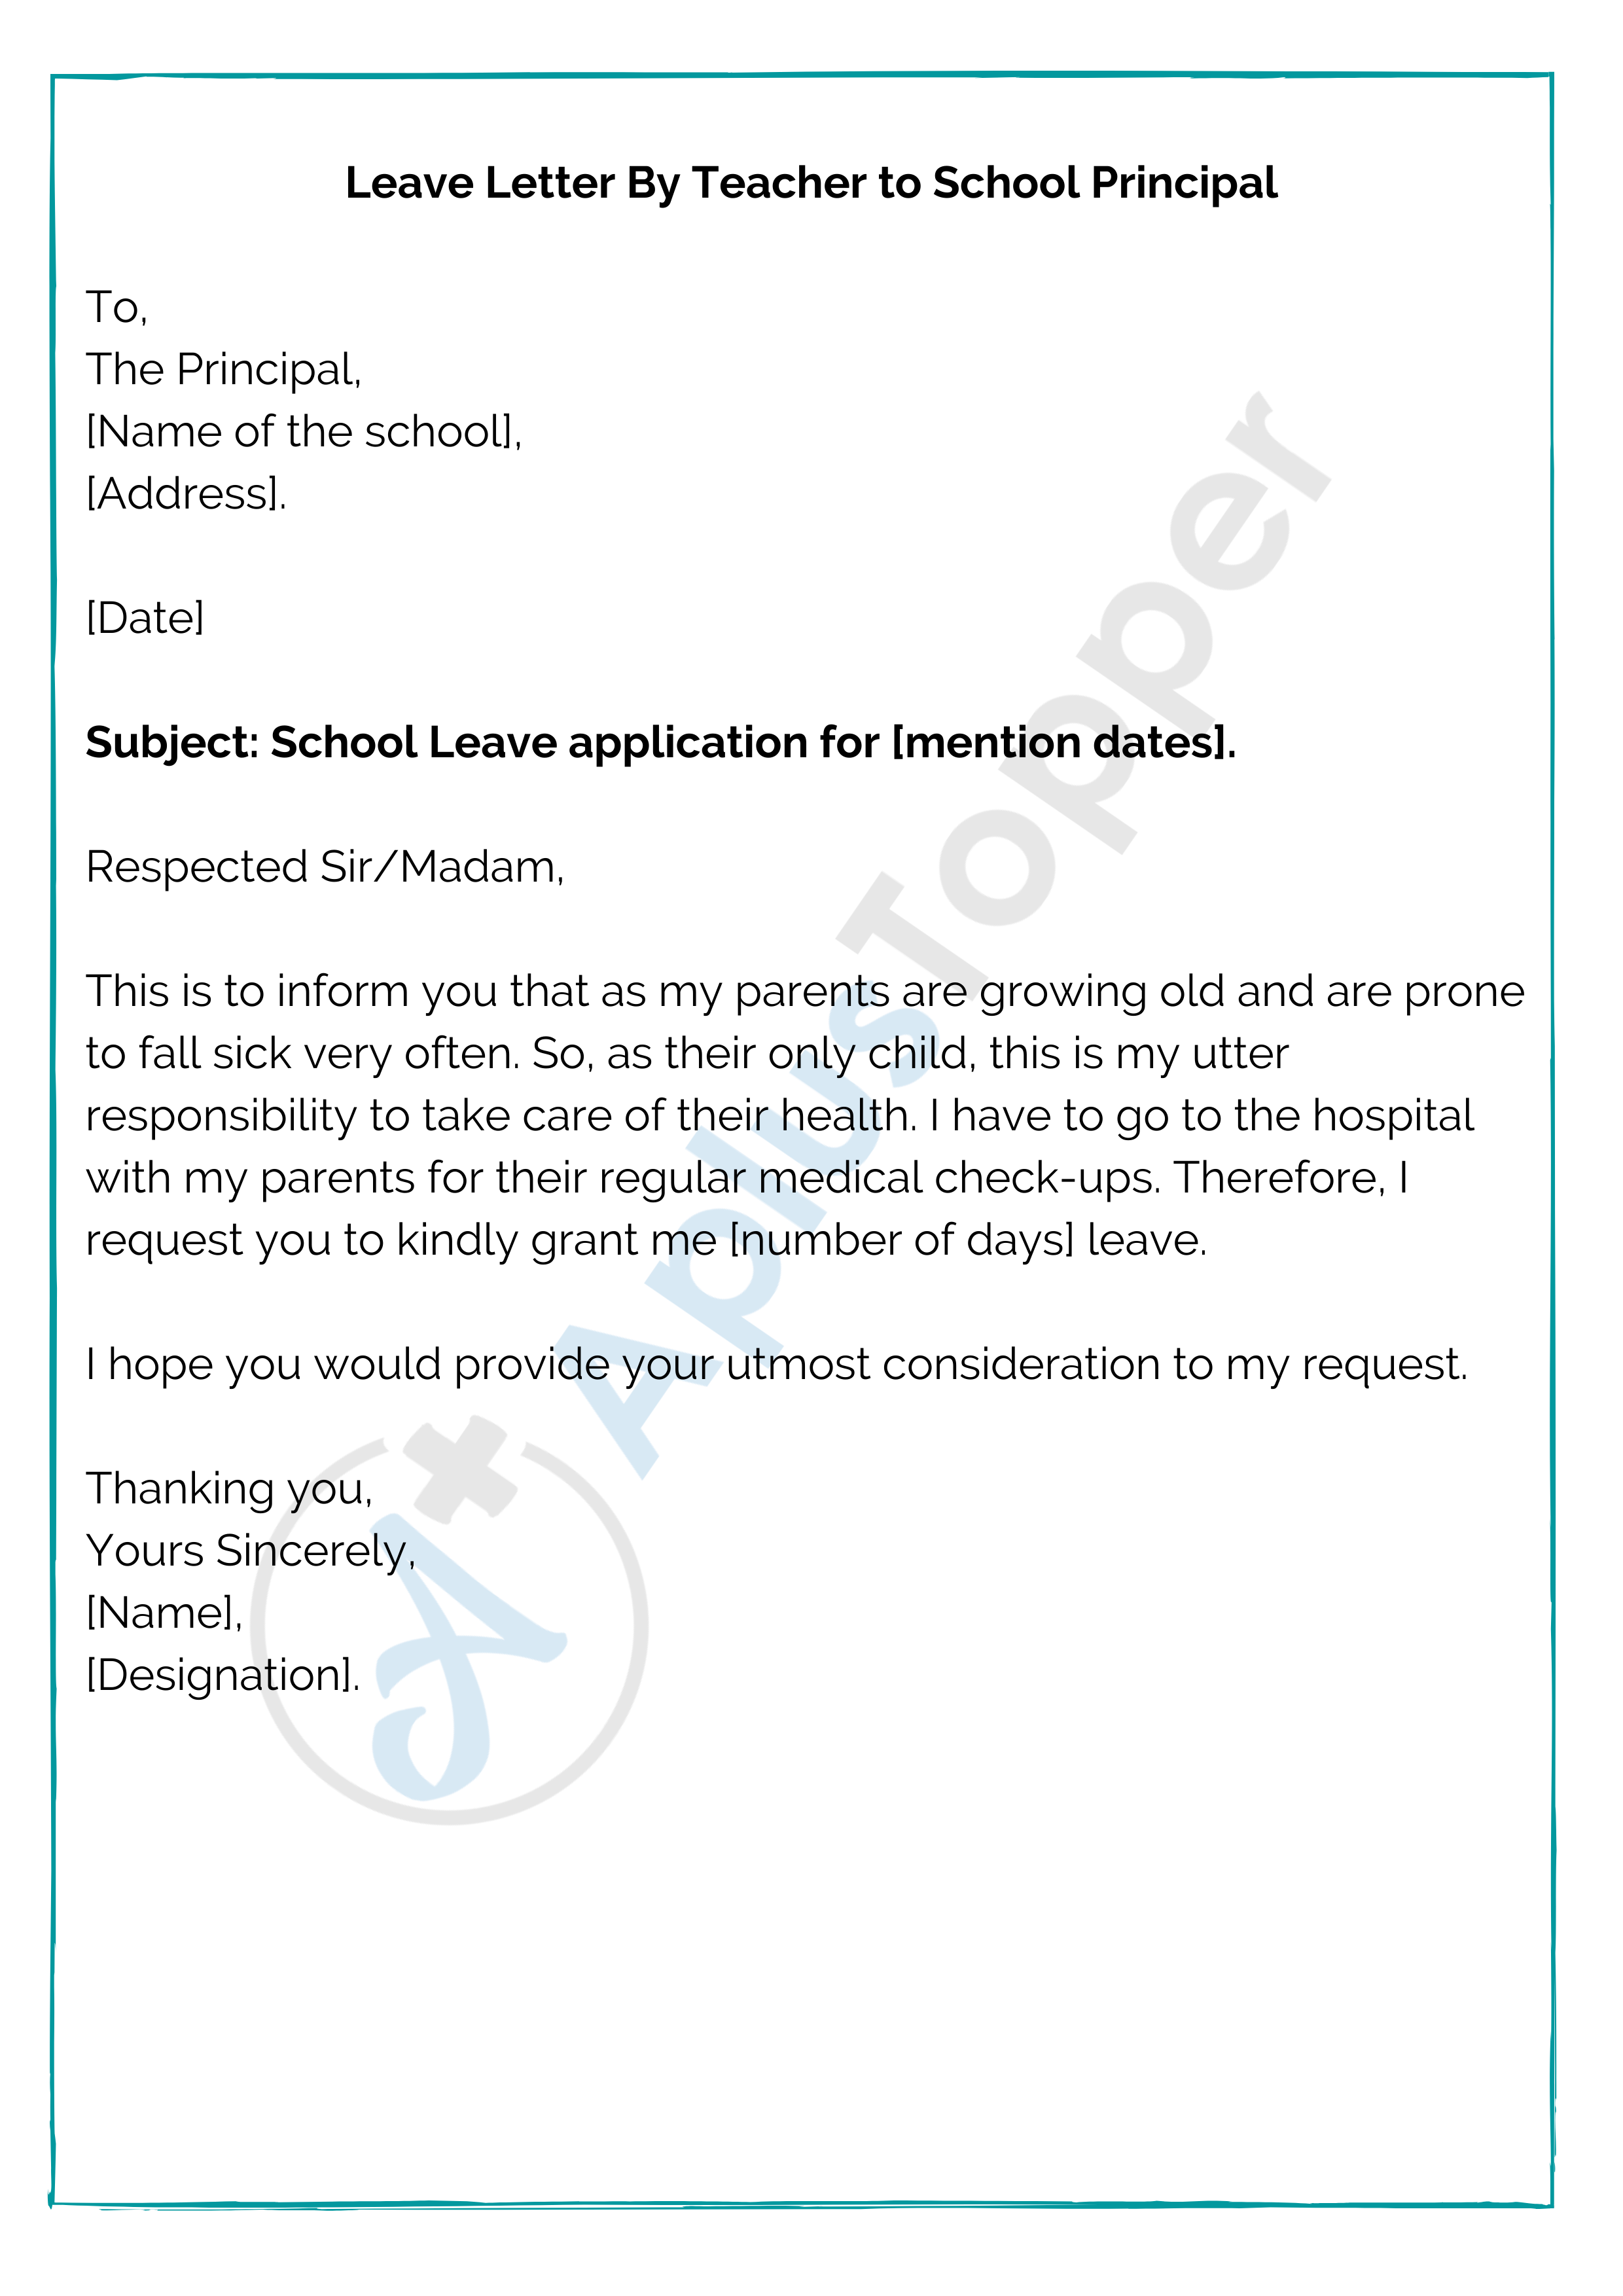 application letter to school principal for leave